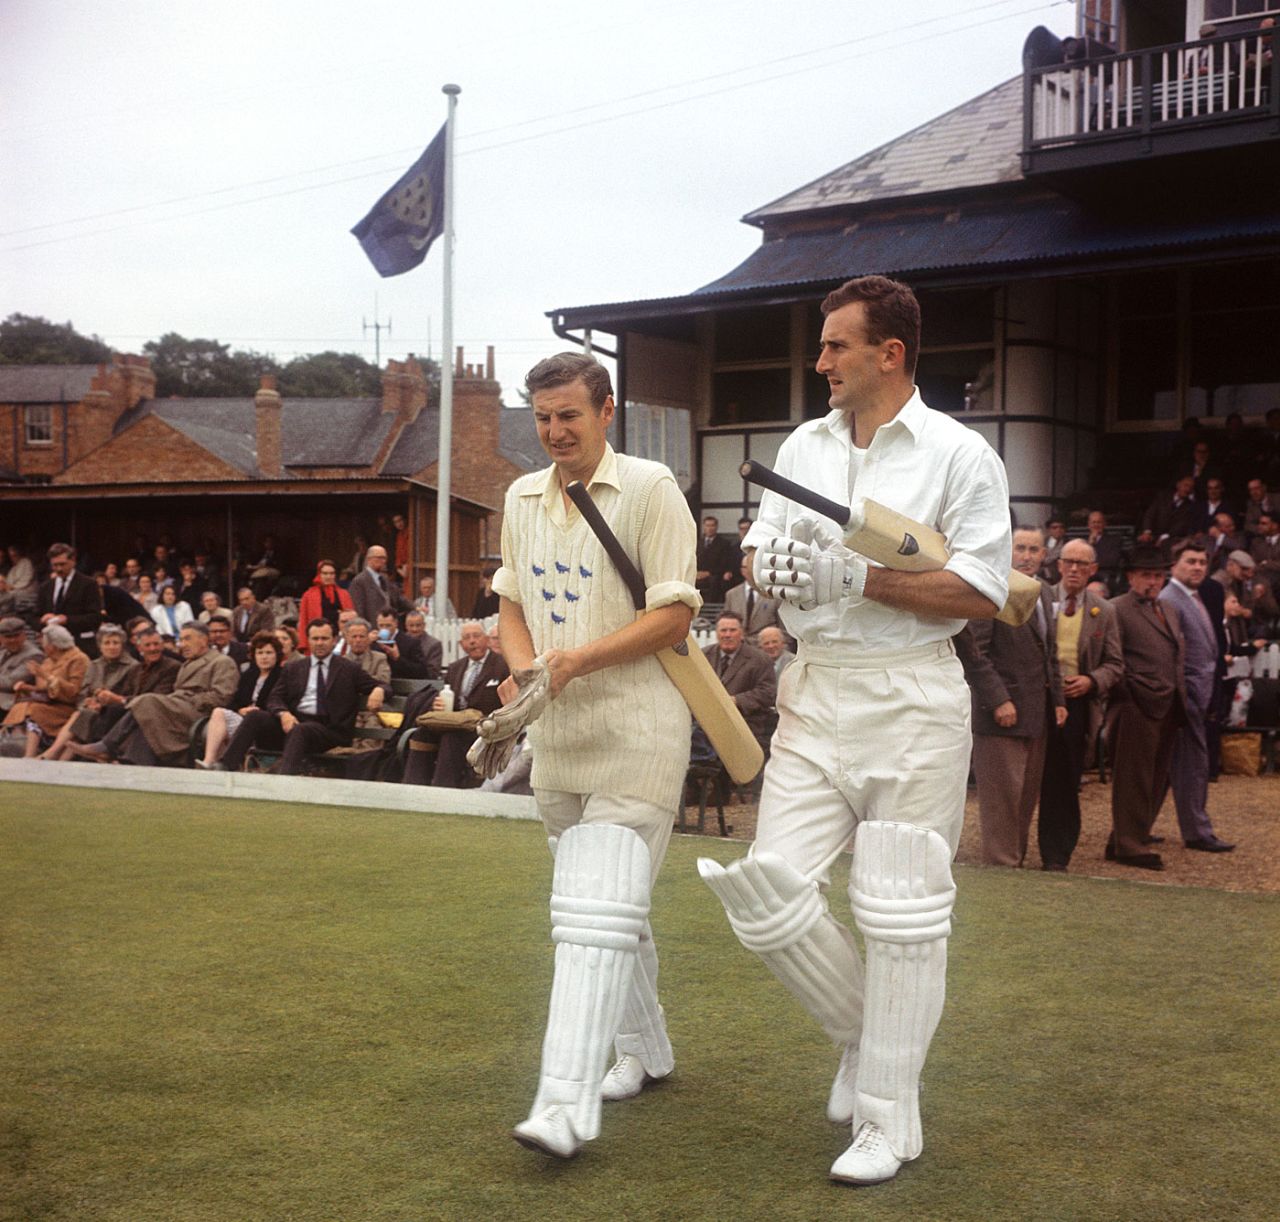 Jim Parks and Ted Dexter walk out to bat for Sussex, July 1956